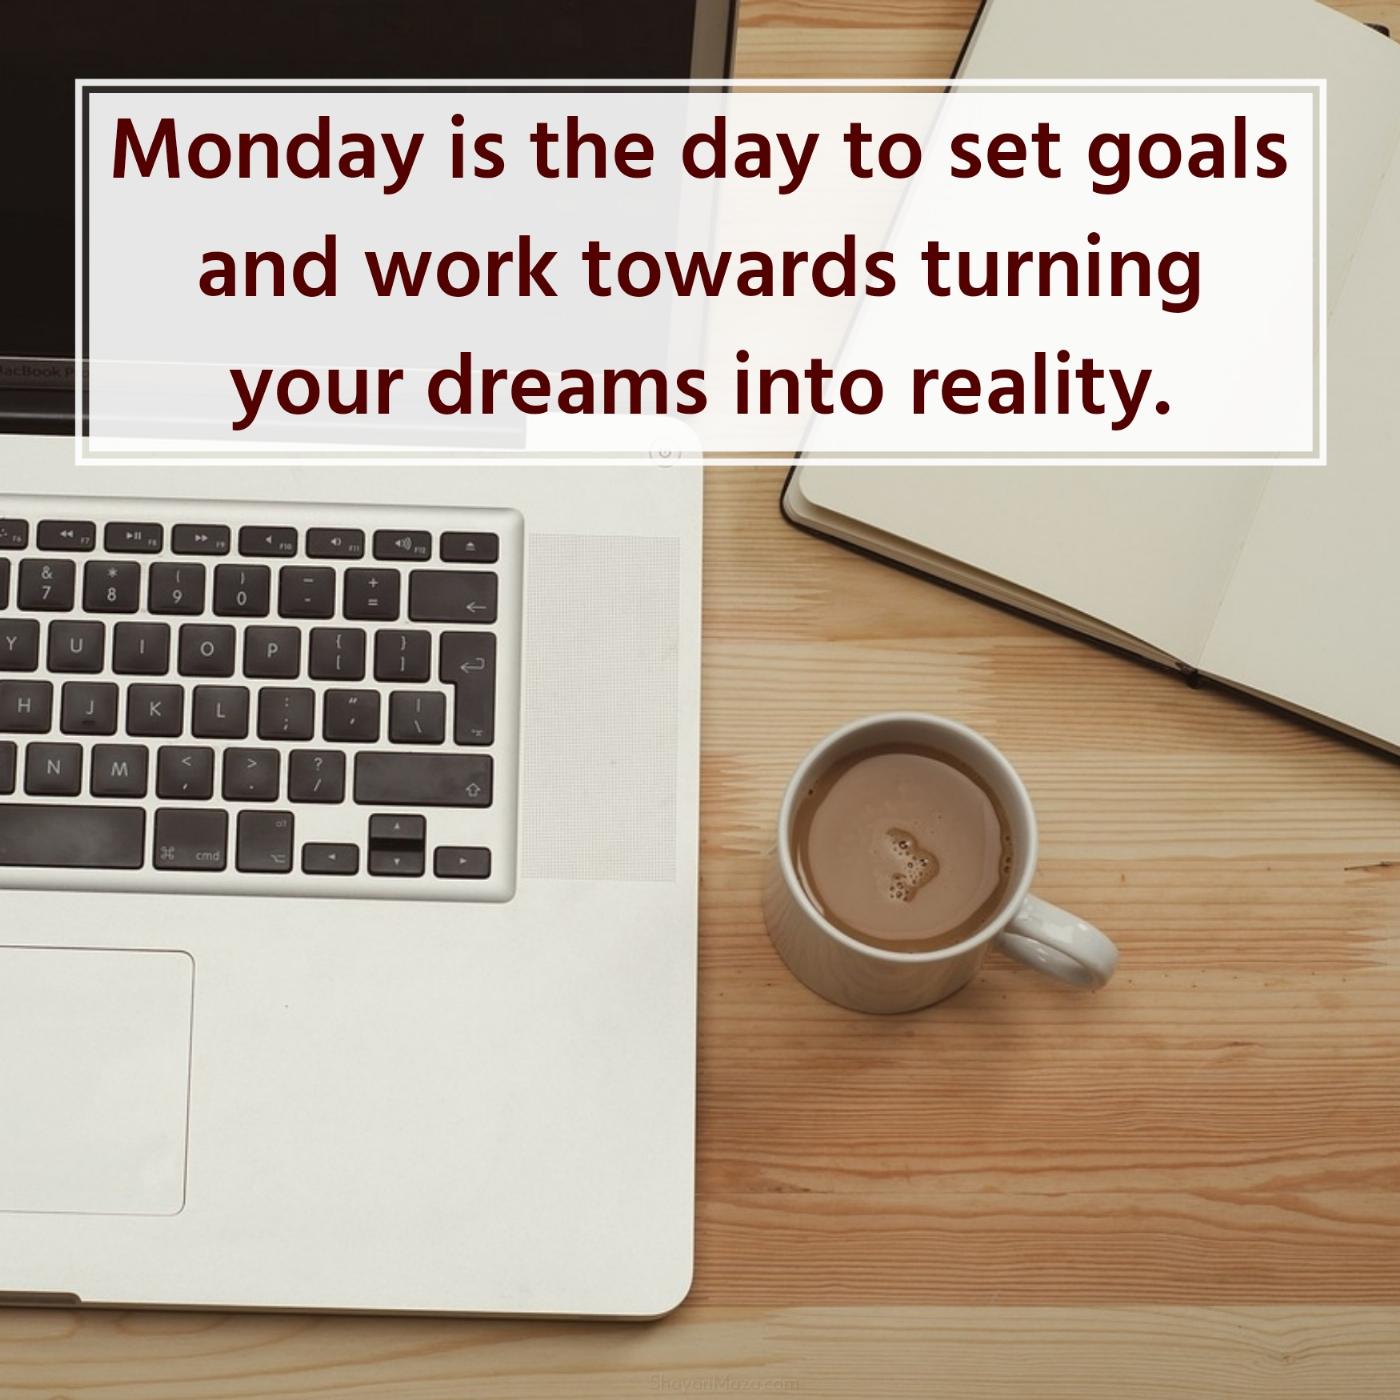 Monday is the day to set goals and work towards